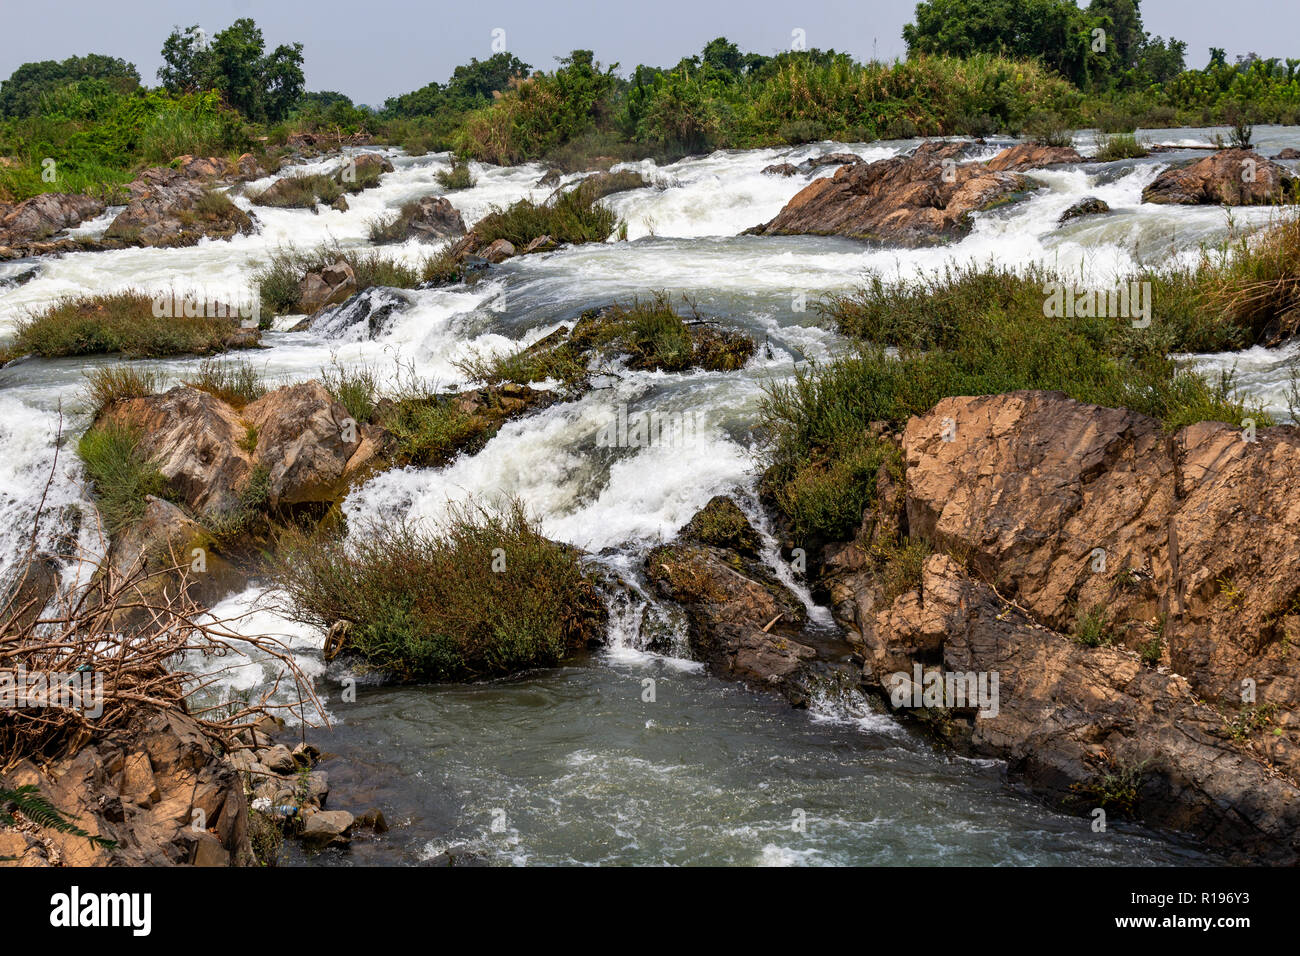 Don Khone, Laos - April 23, 2018: Rapids over the Mekong river on the Four Thousand Islands zone near the border between Laos and Cambodia Stock Photo